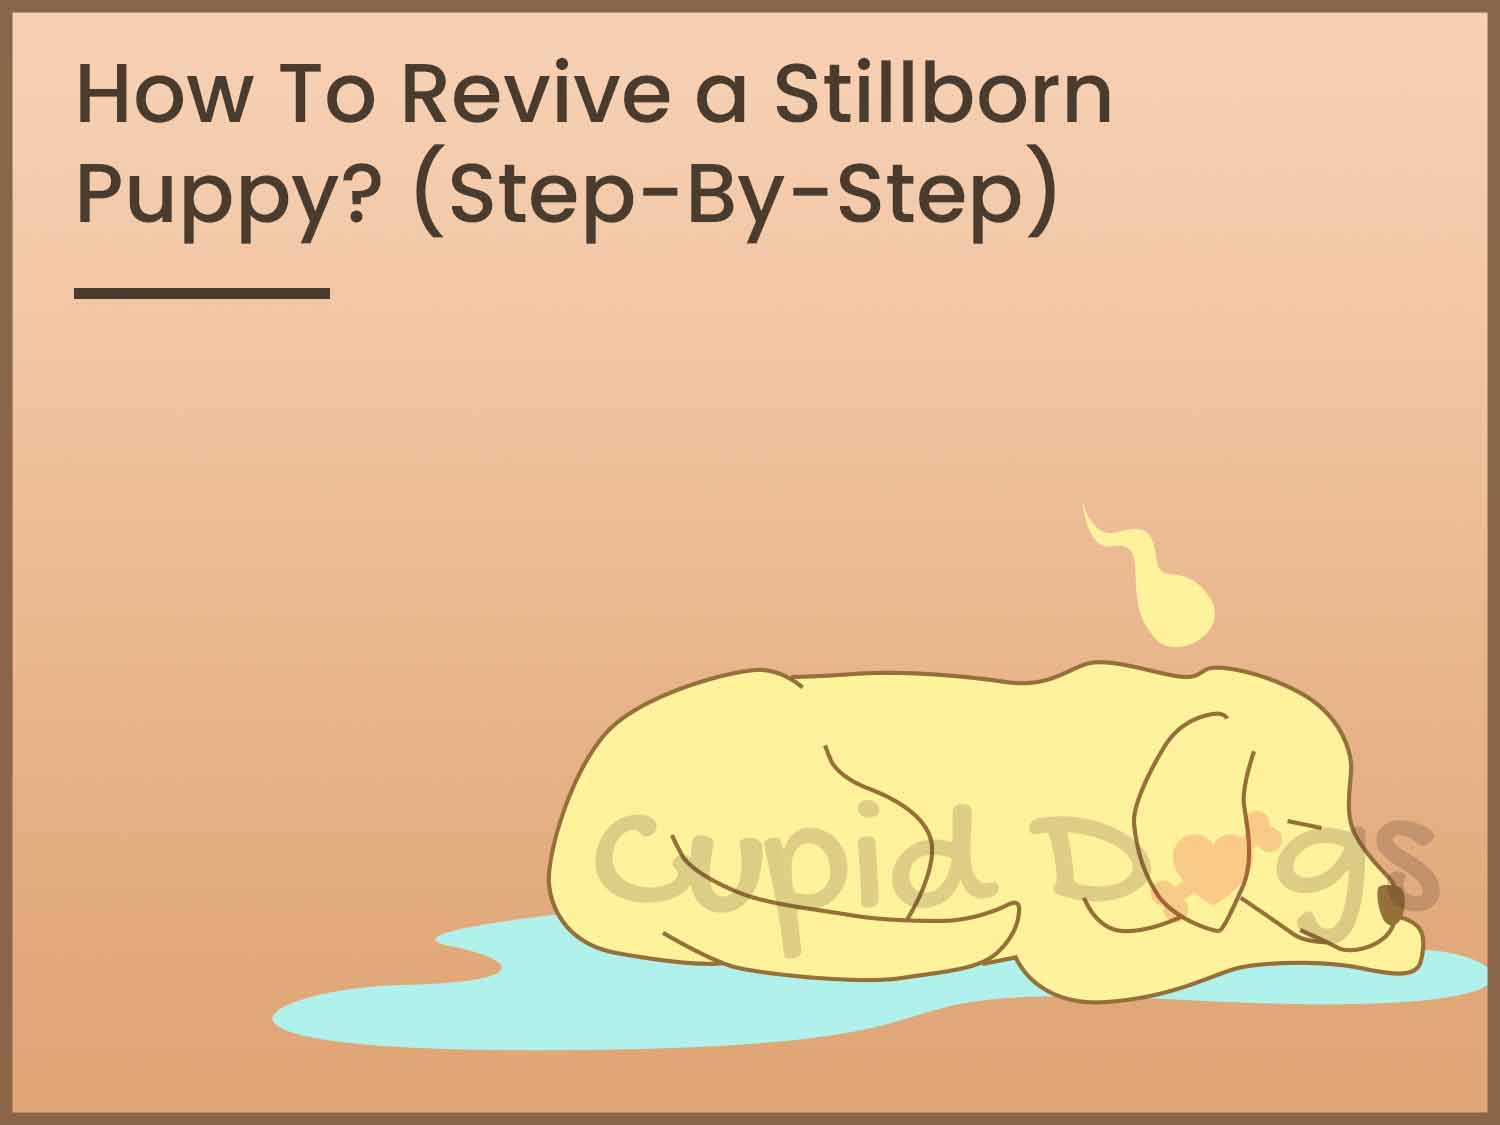 How To Revive a Stillborn Puppy?